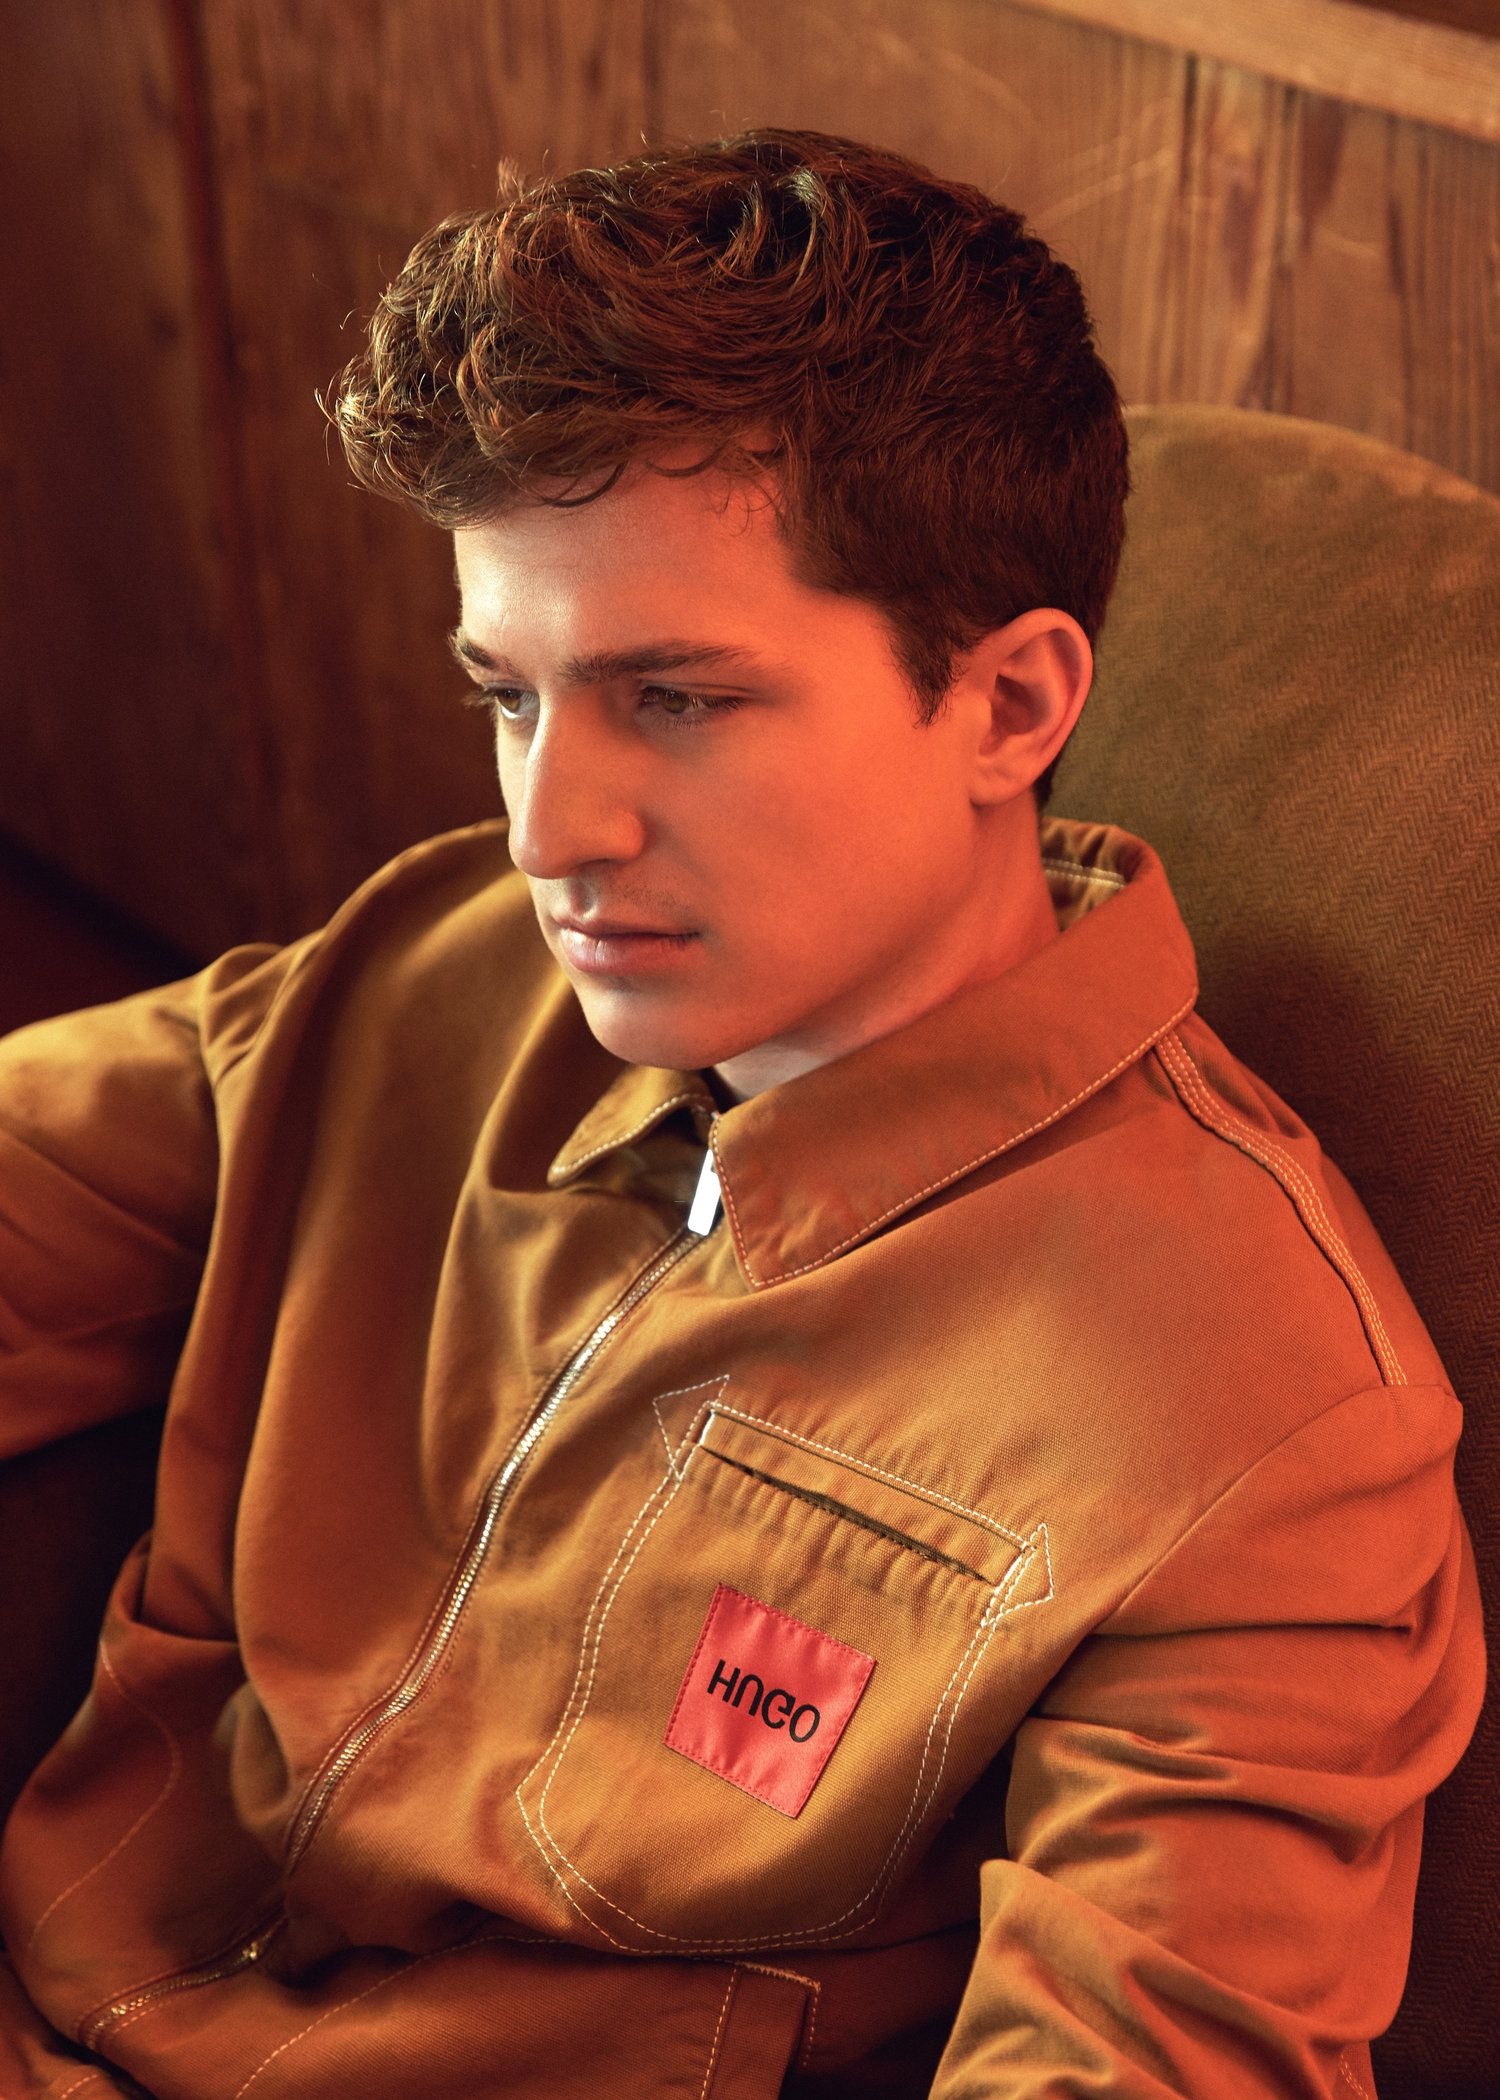 Charlie Puth: Released “Attention”, The lead single from his second studio album Voicenotes, April 21, 2017. 1500x2100 HD Wallpaper.